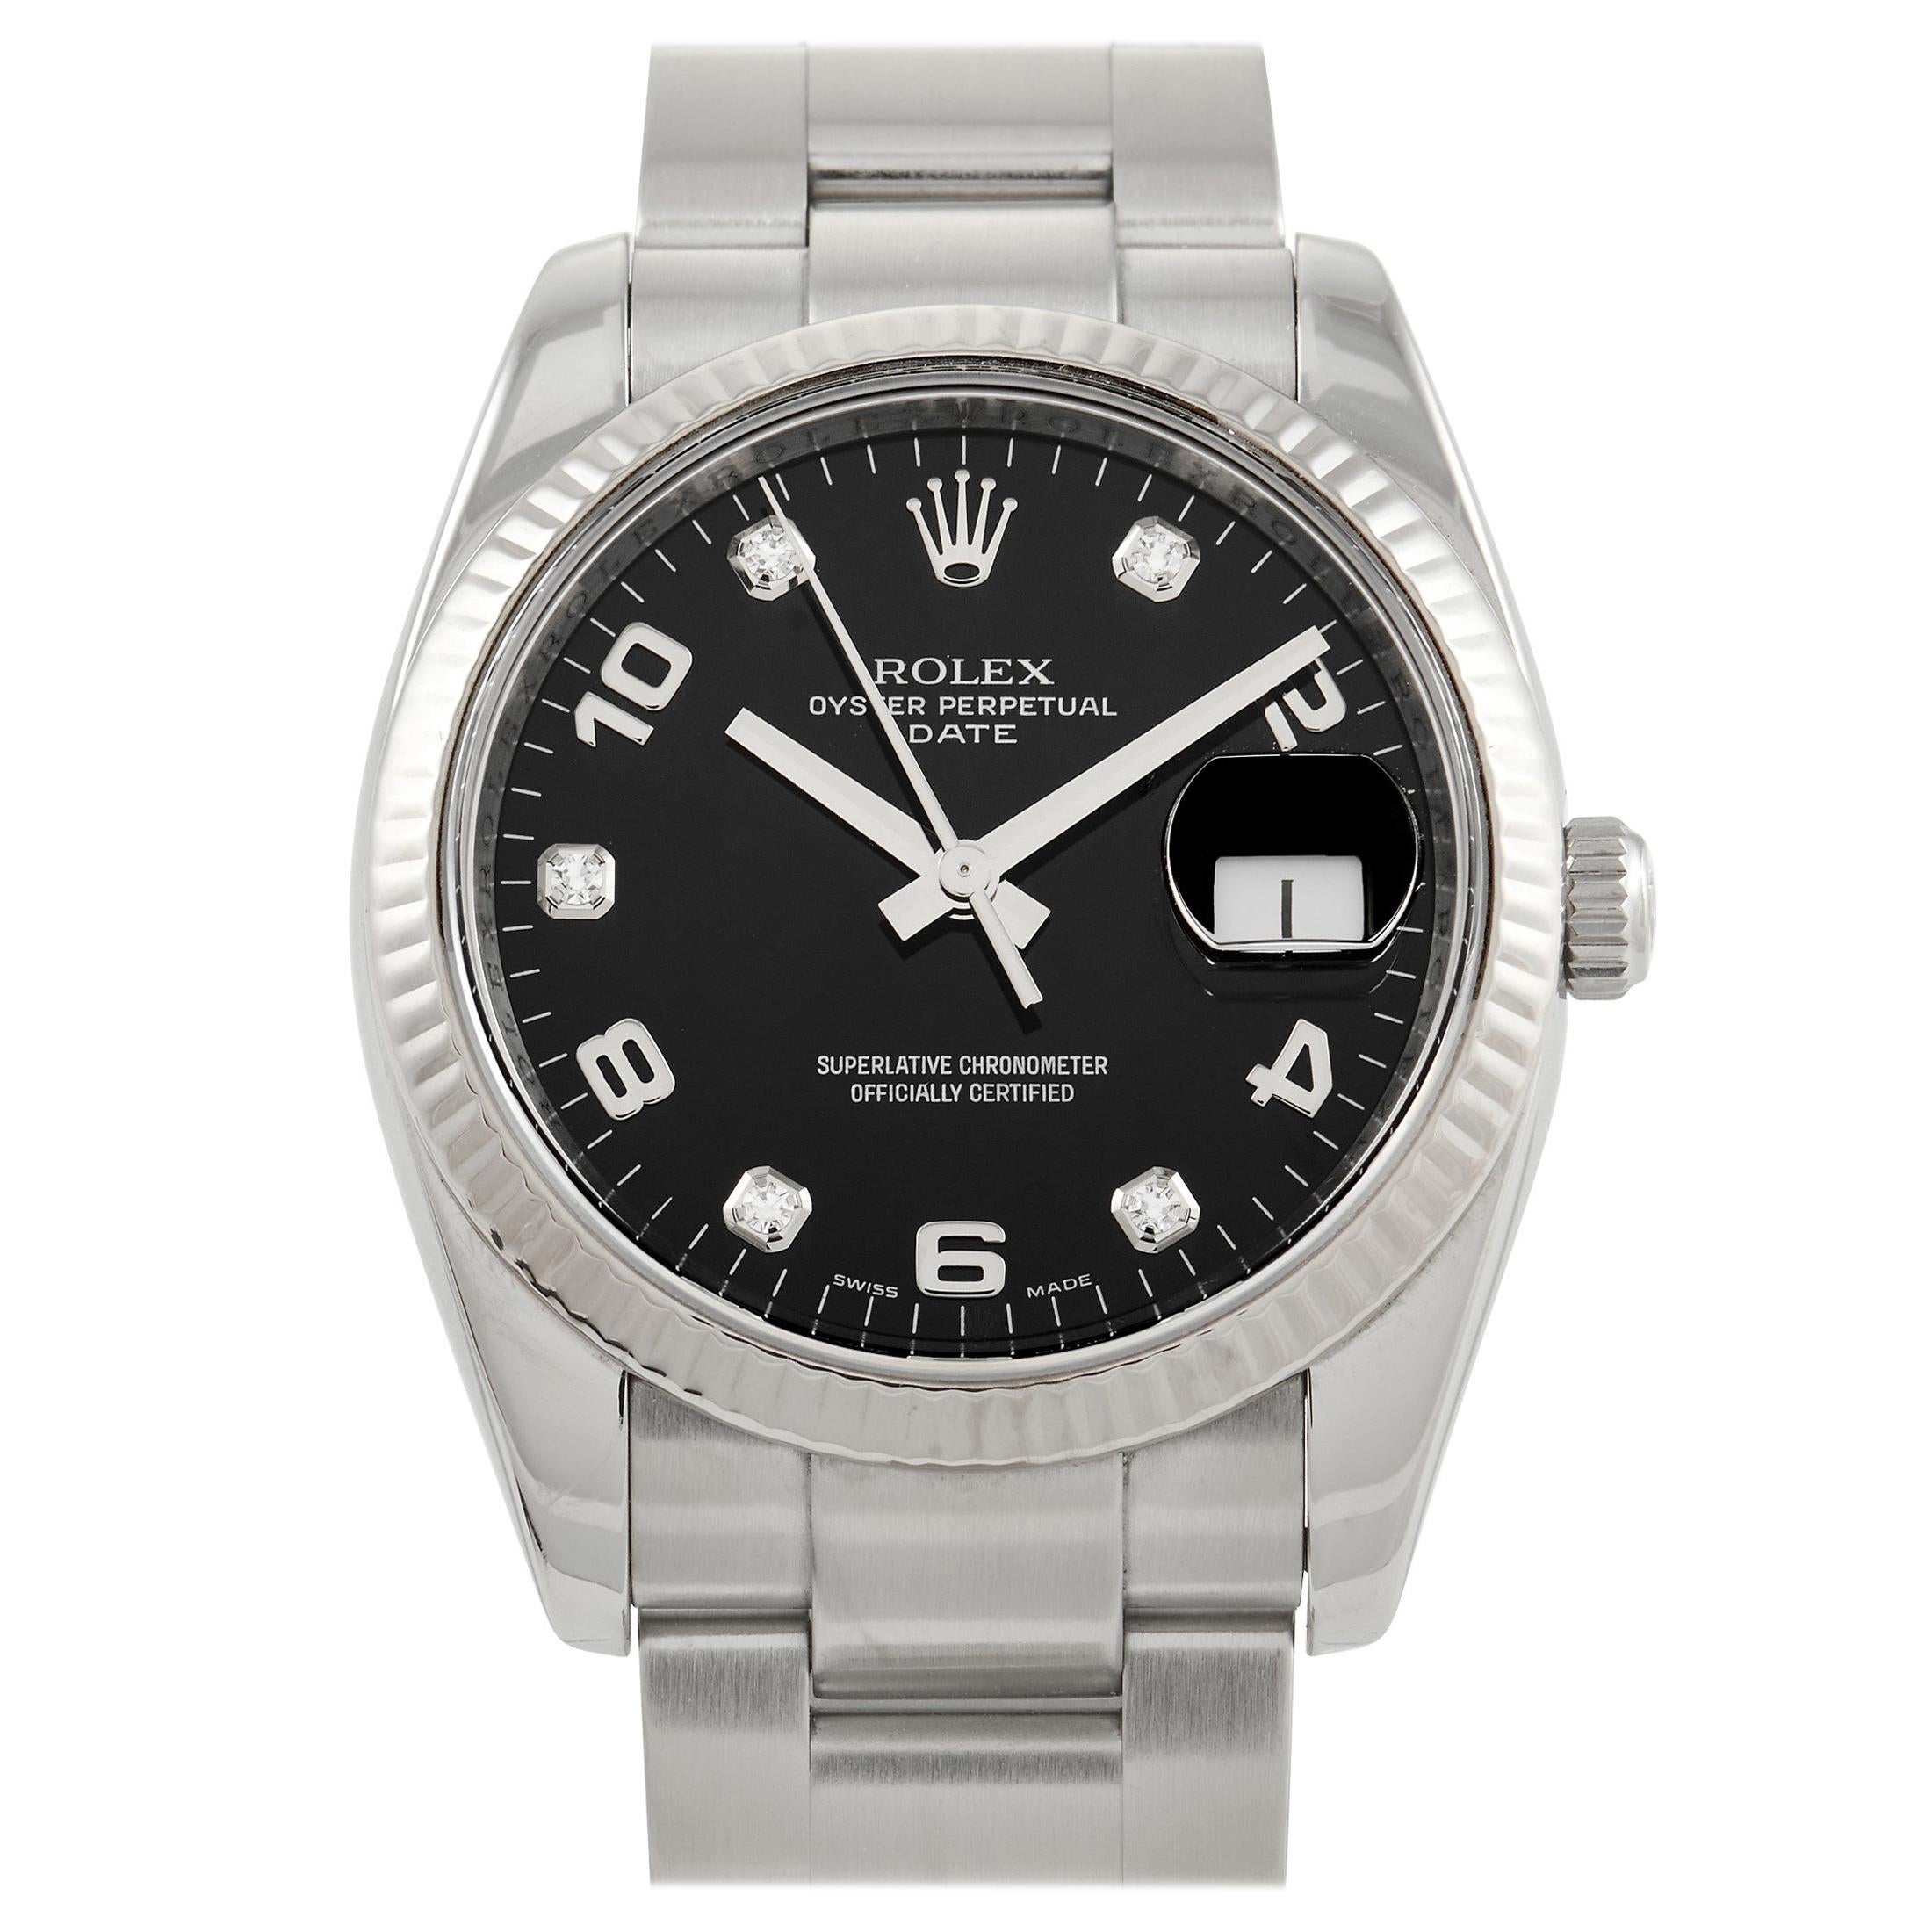 Rolex Oyster Perpetual Day Date Diamond Dial Watch 115234BKDO